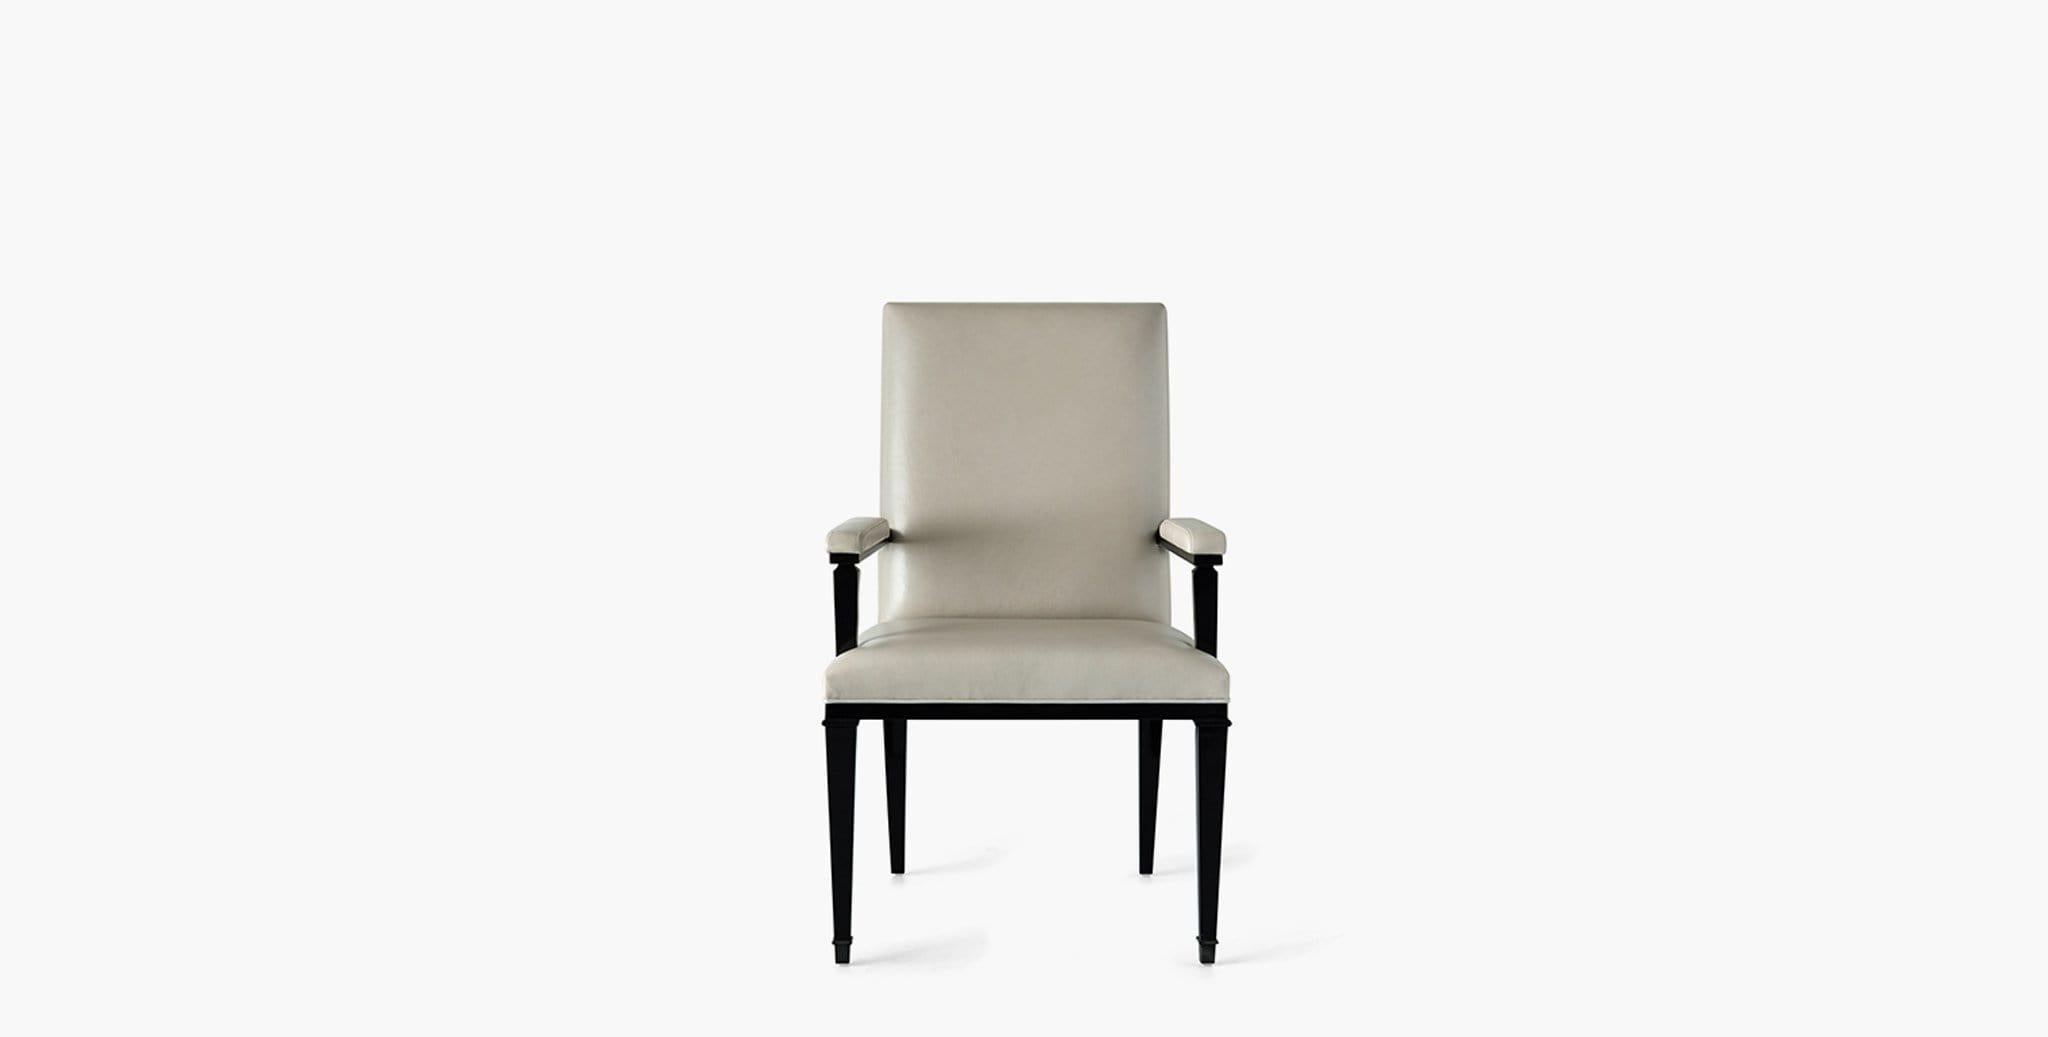 Our Oliver Desk Chair is modeled after the classic antique chair with its padded arms and high back. This chair seamlessly transitions from desk chair to dining chair. Our handcrafted leathers and finishes are inspired by the natural variations